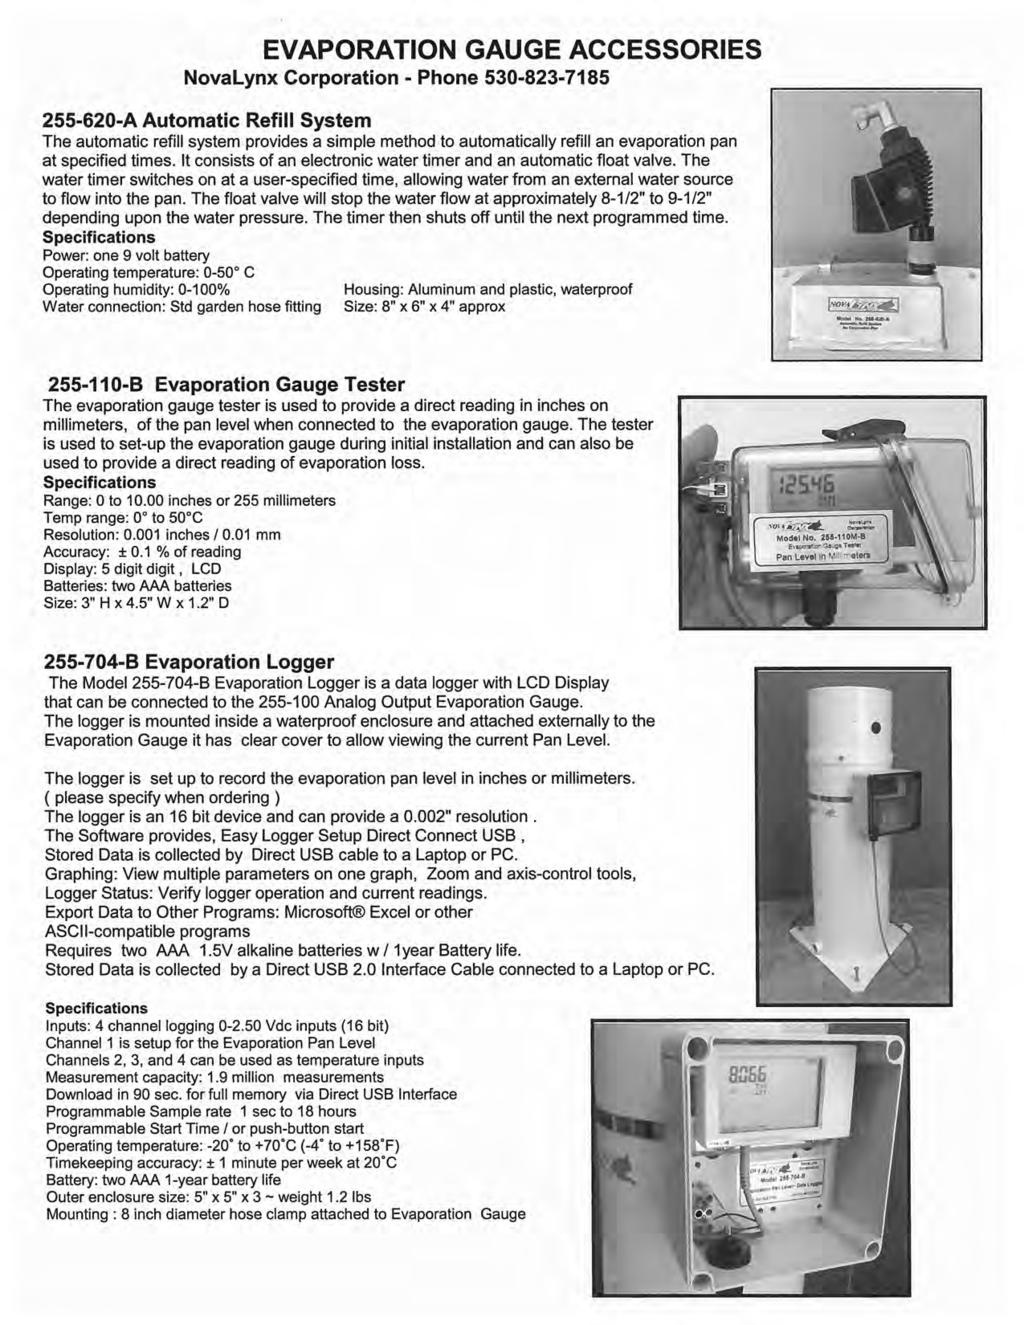 EVAPORATION GAUGE ACCESSORIES Novalynx Corporation- Phone 530-823-7185 255-620-A Automatic Refill System The automatic refill system provides a simple method to automatically refill an evaporation